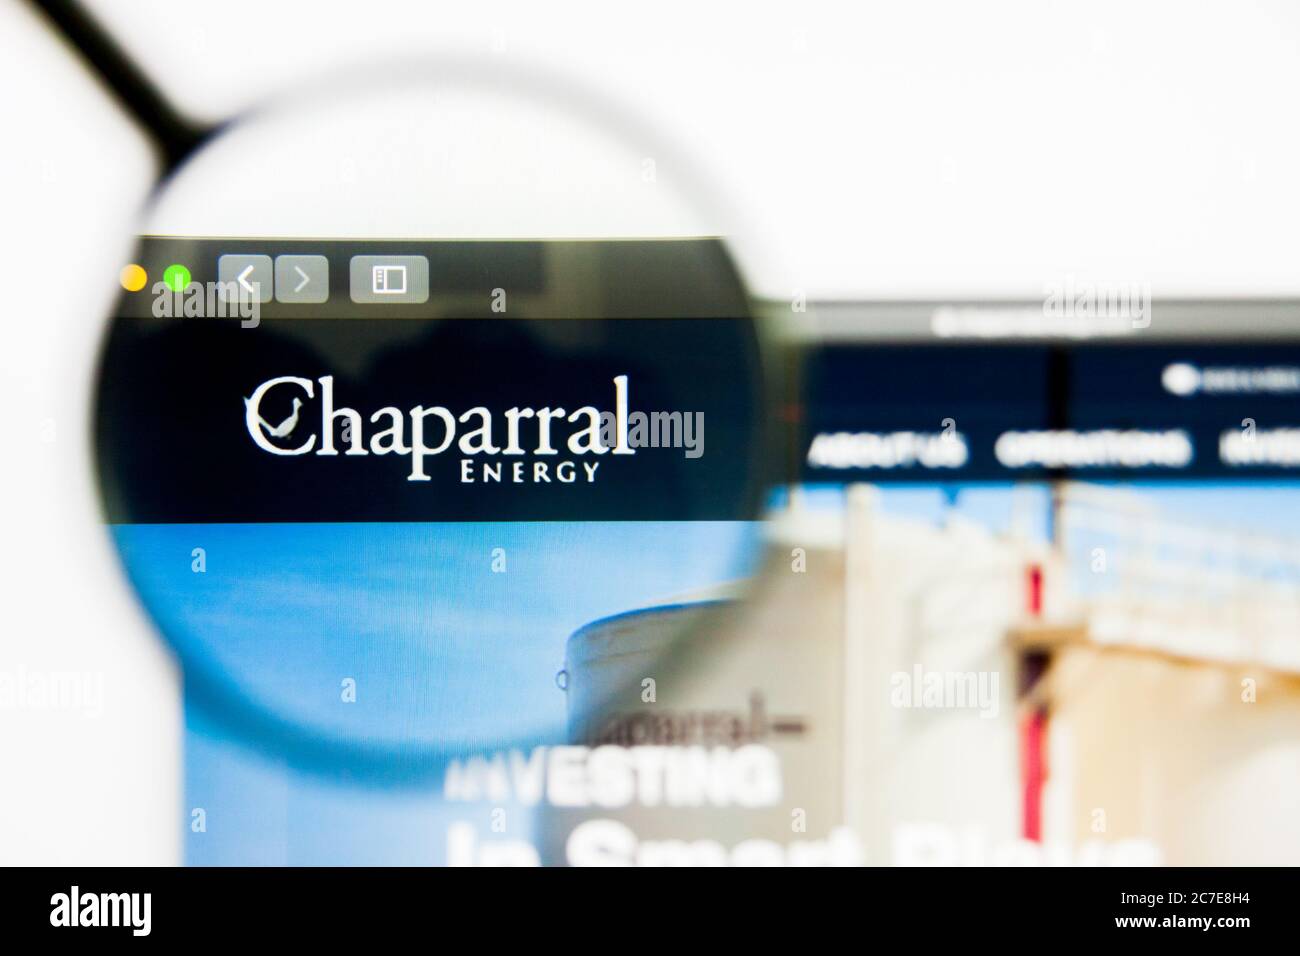 Los Angeles, California, USA - 25 March 2019: Illustrative Editorial of Chaparral Energy website homepage. Chaparral Energy logo visible on display Stock Photo